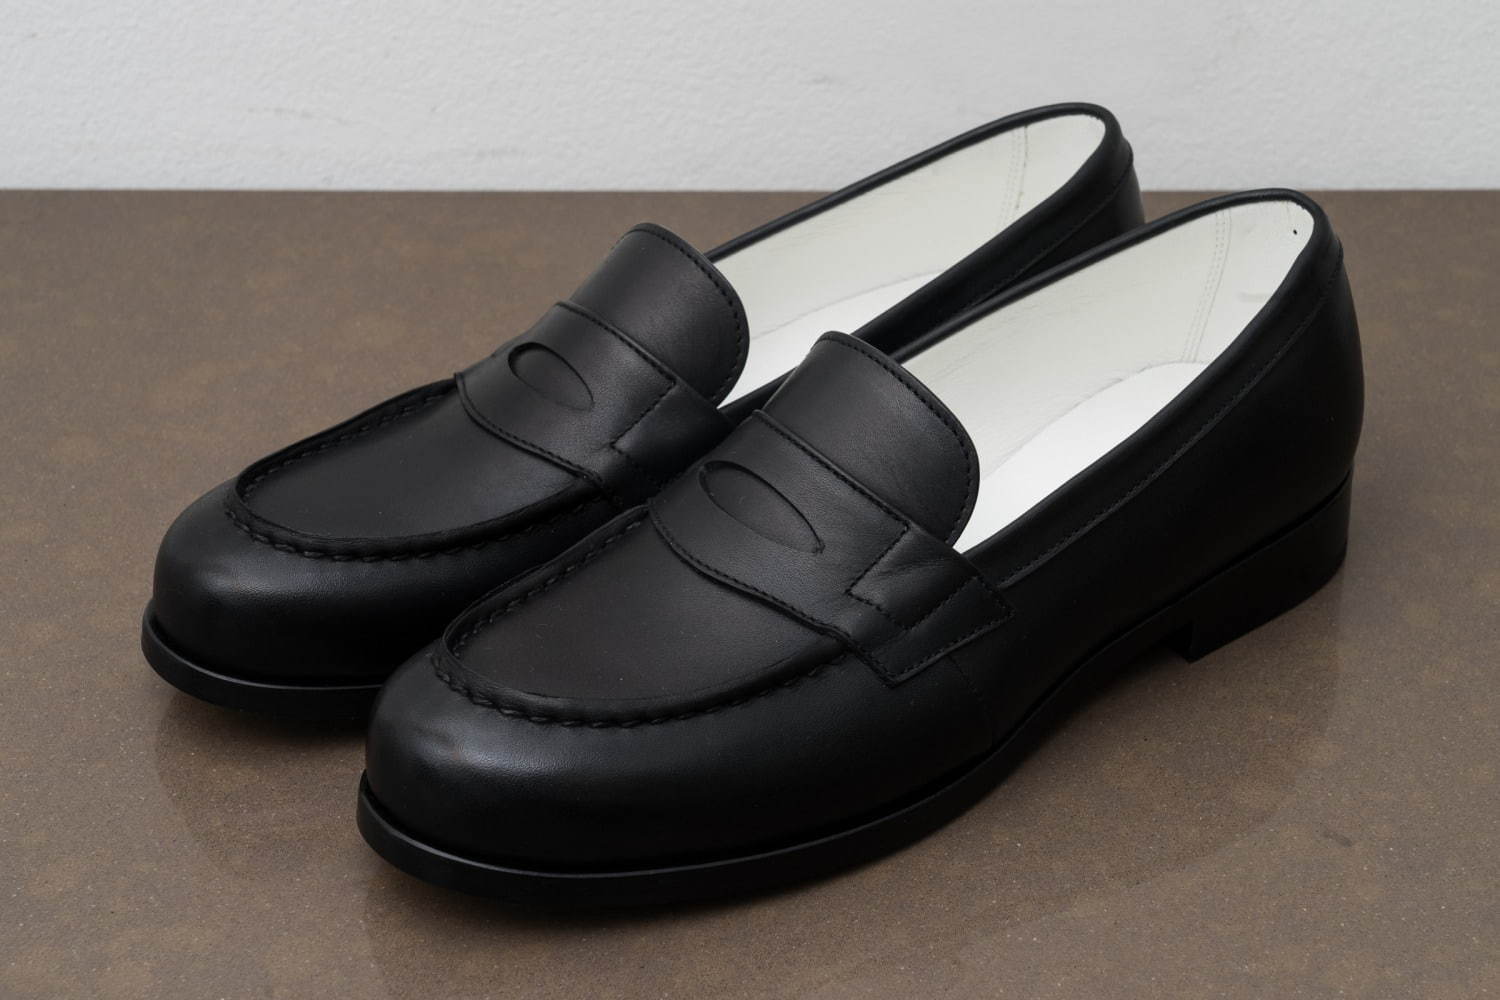 LOAFER(LEATHER SOLE) 45,000円＋税